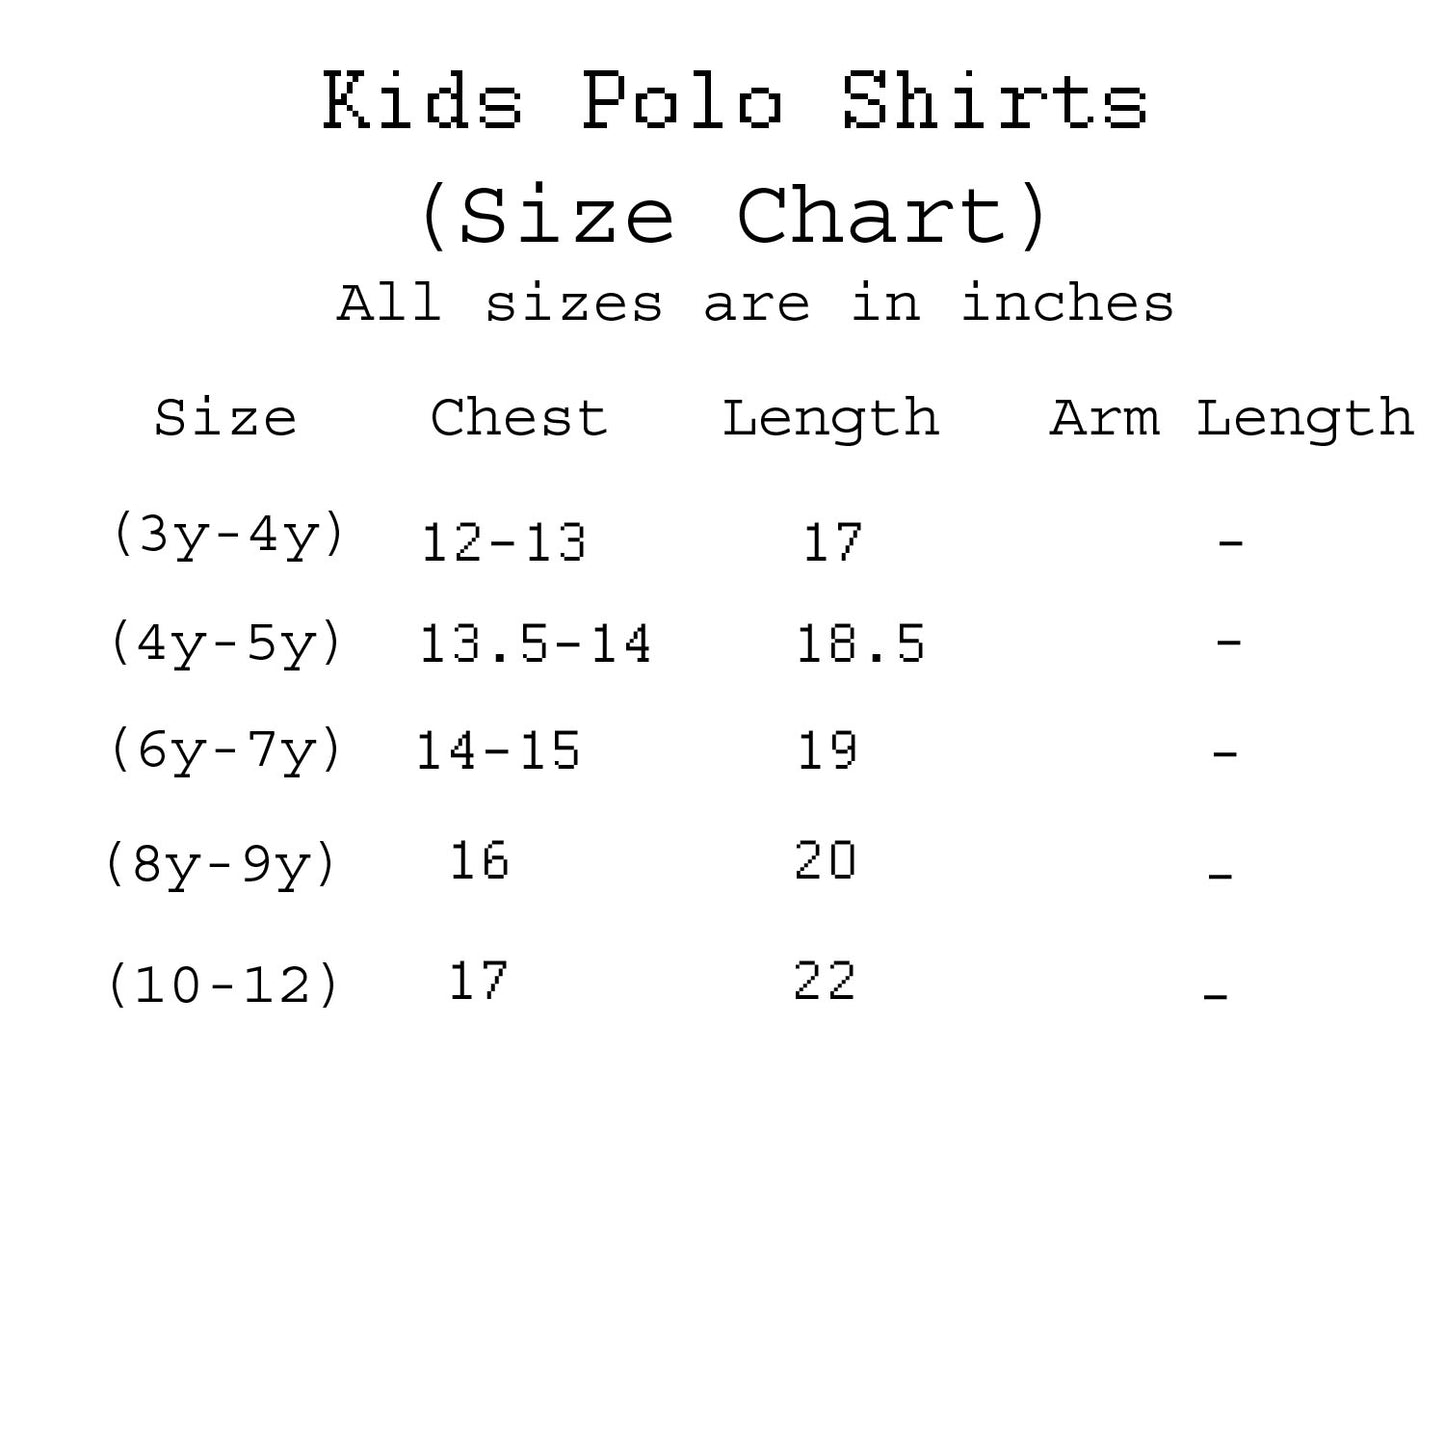 Exclusive Tommy Kids Polo Shirt - N-W-R